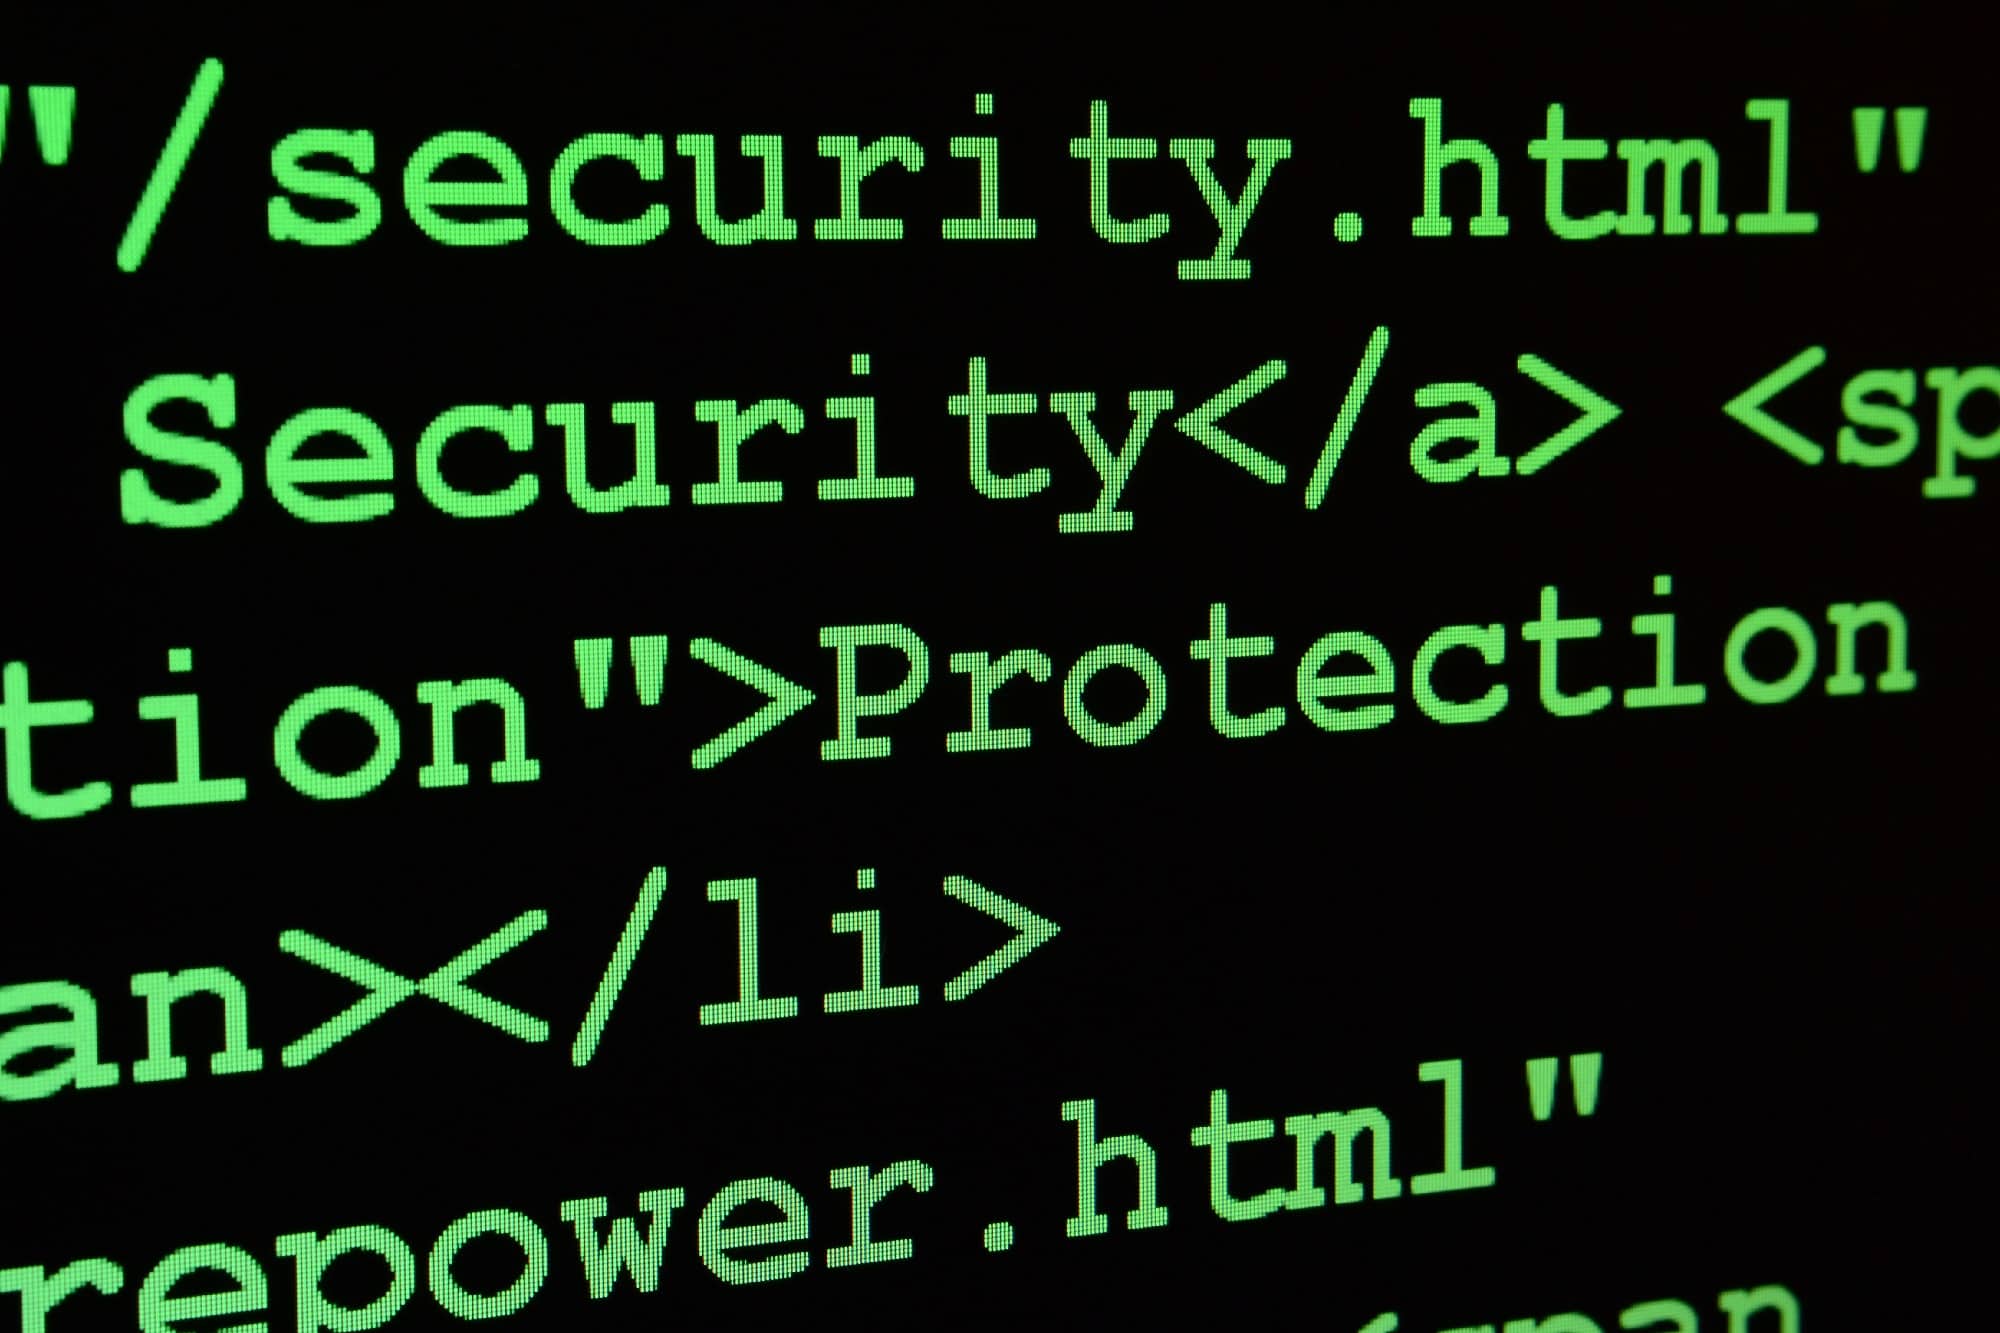 Common Web Security Vulnerabilities and Ways to Prevent Them